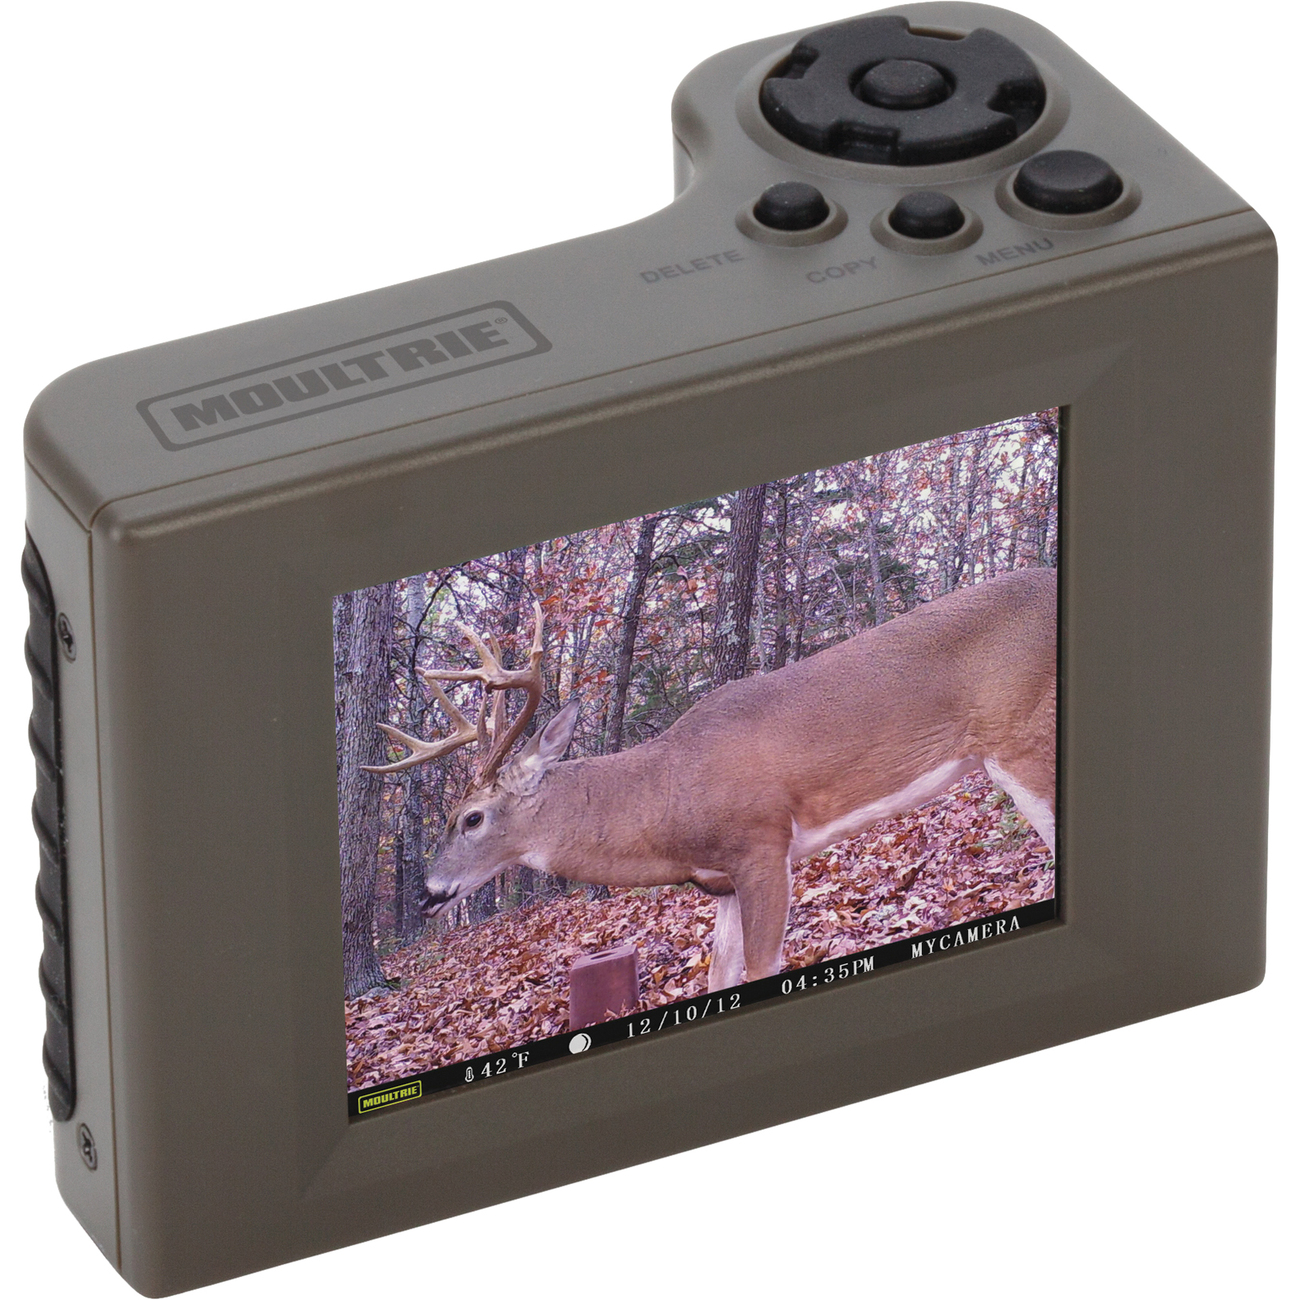 Moultrie Handheld Viewer